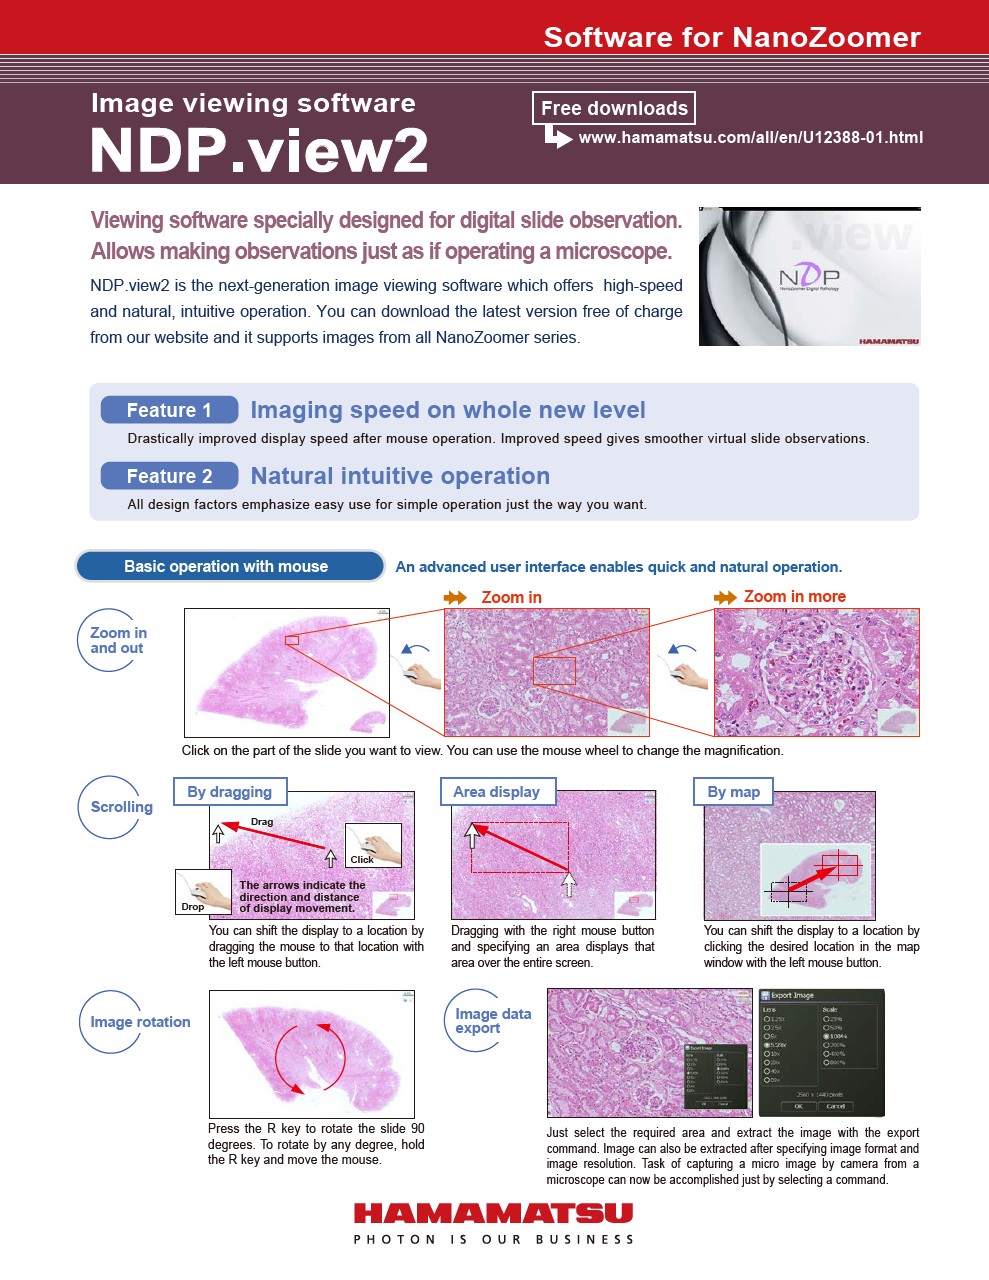 Image viewing software NDP.view2